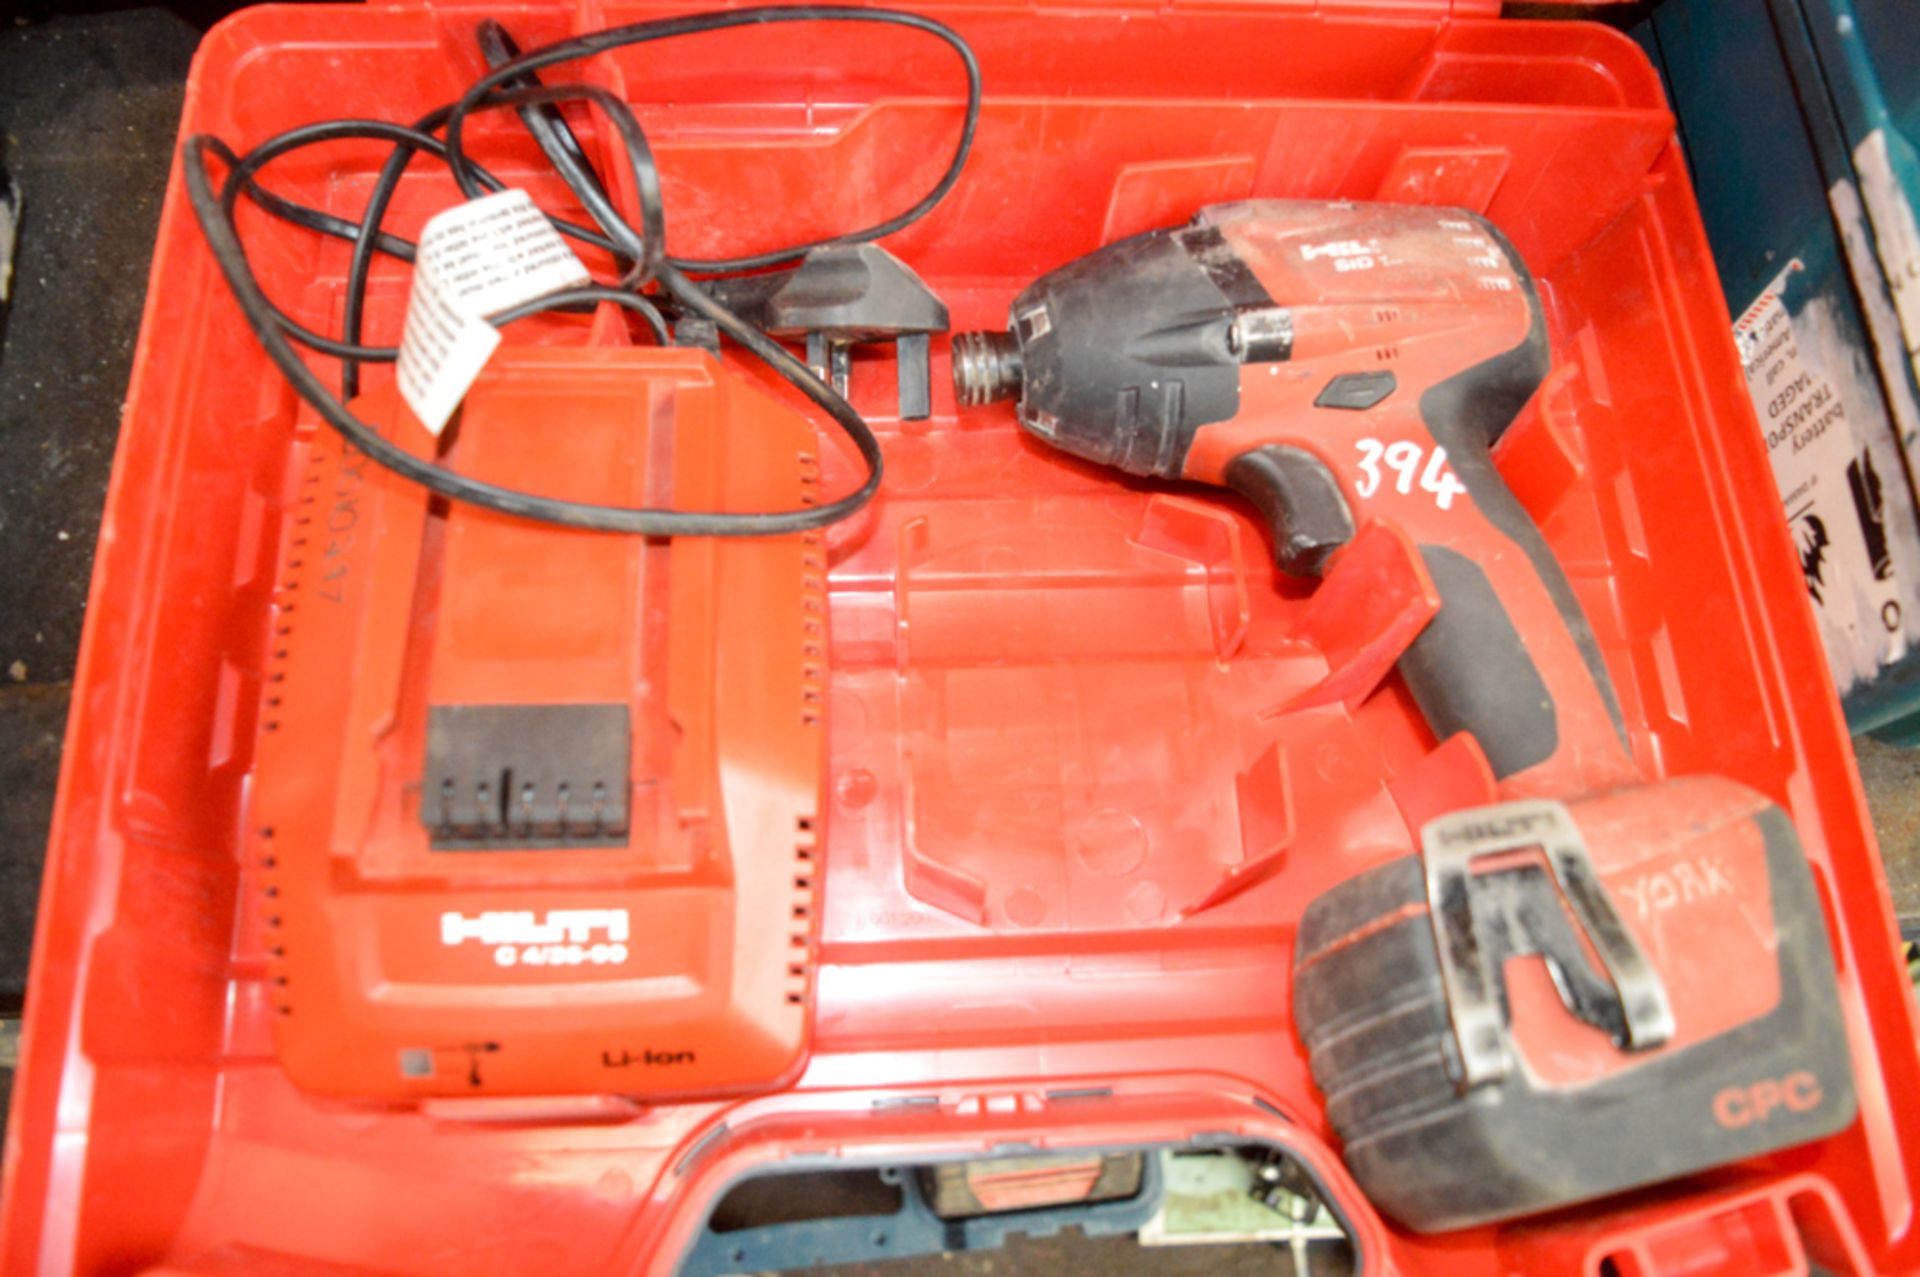 Hilti SID 14-A cordless screwgun c/w battery, charger & carry case E0010297